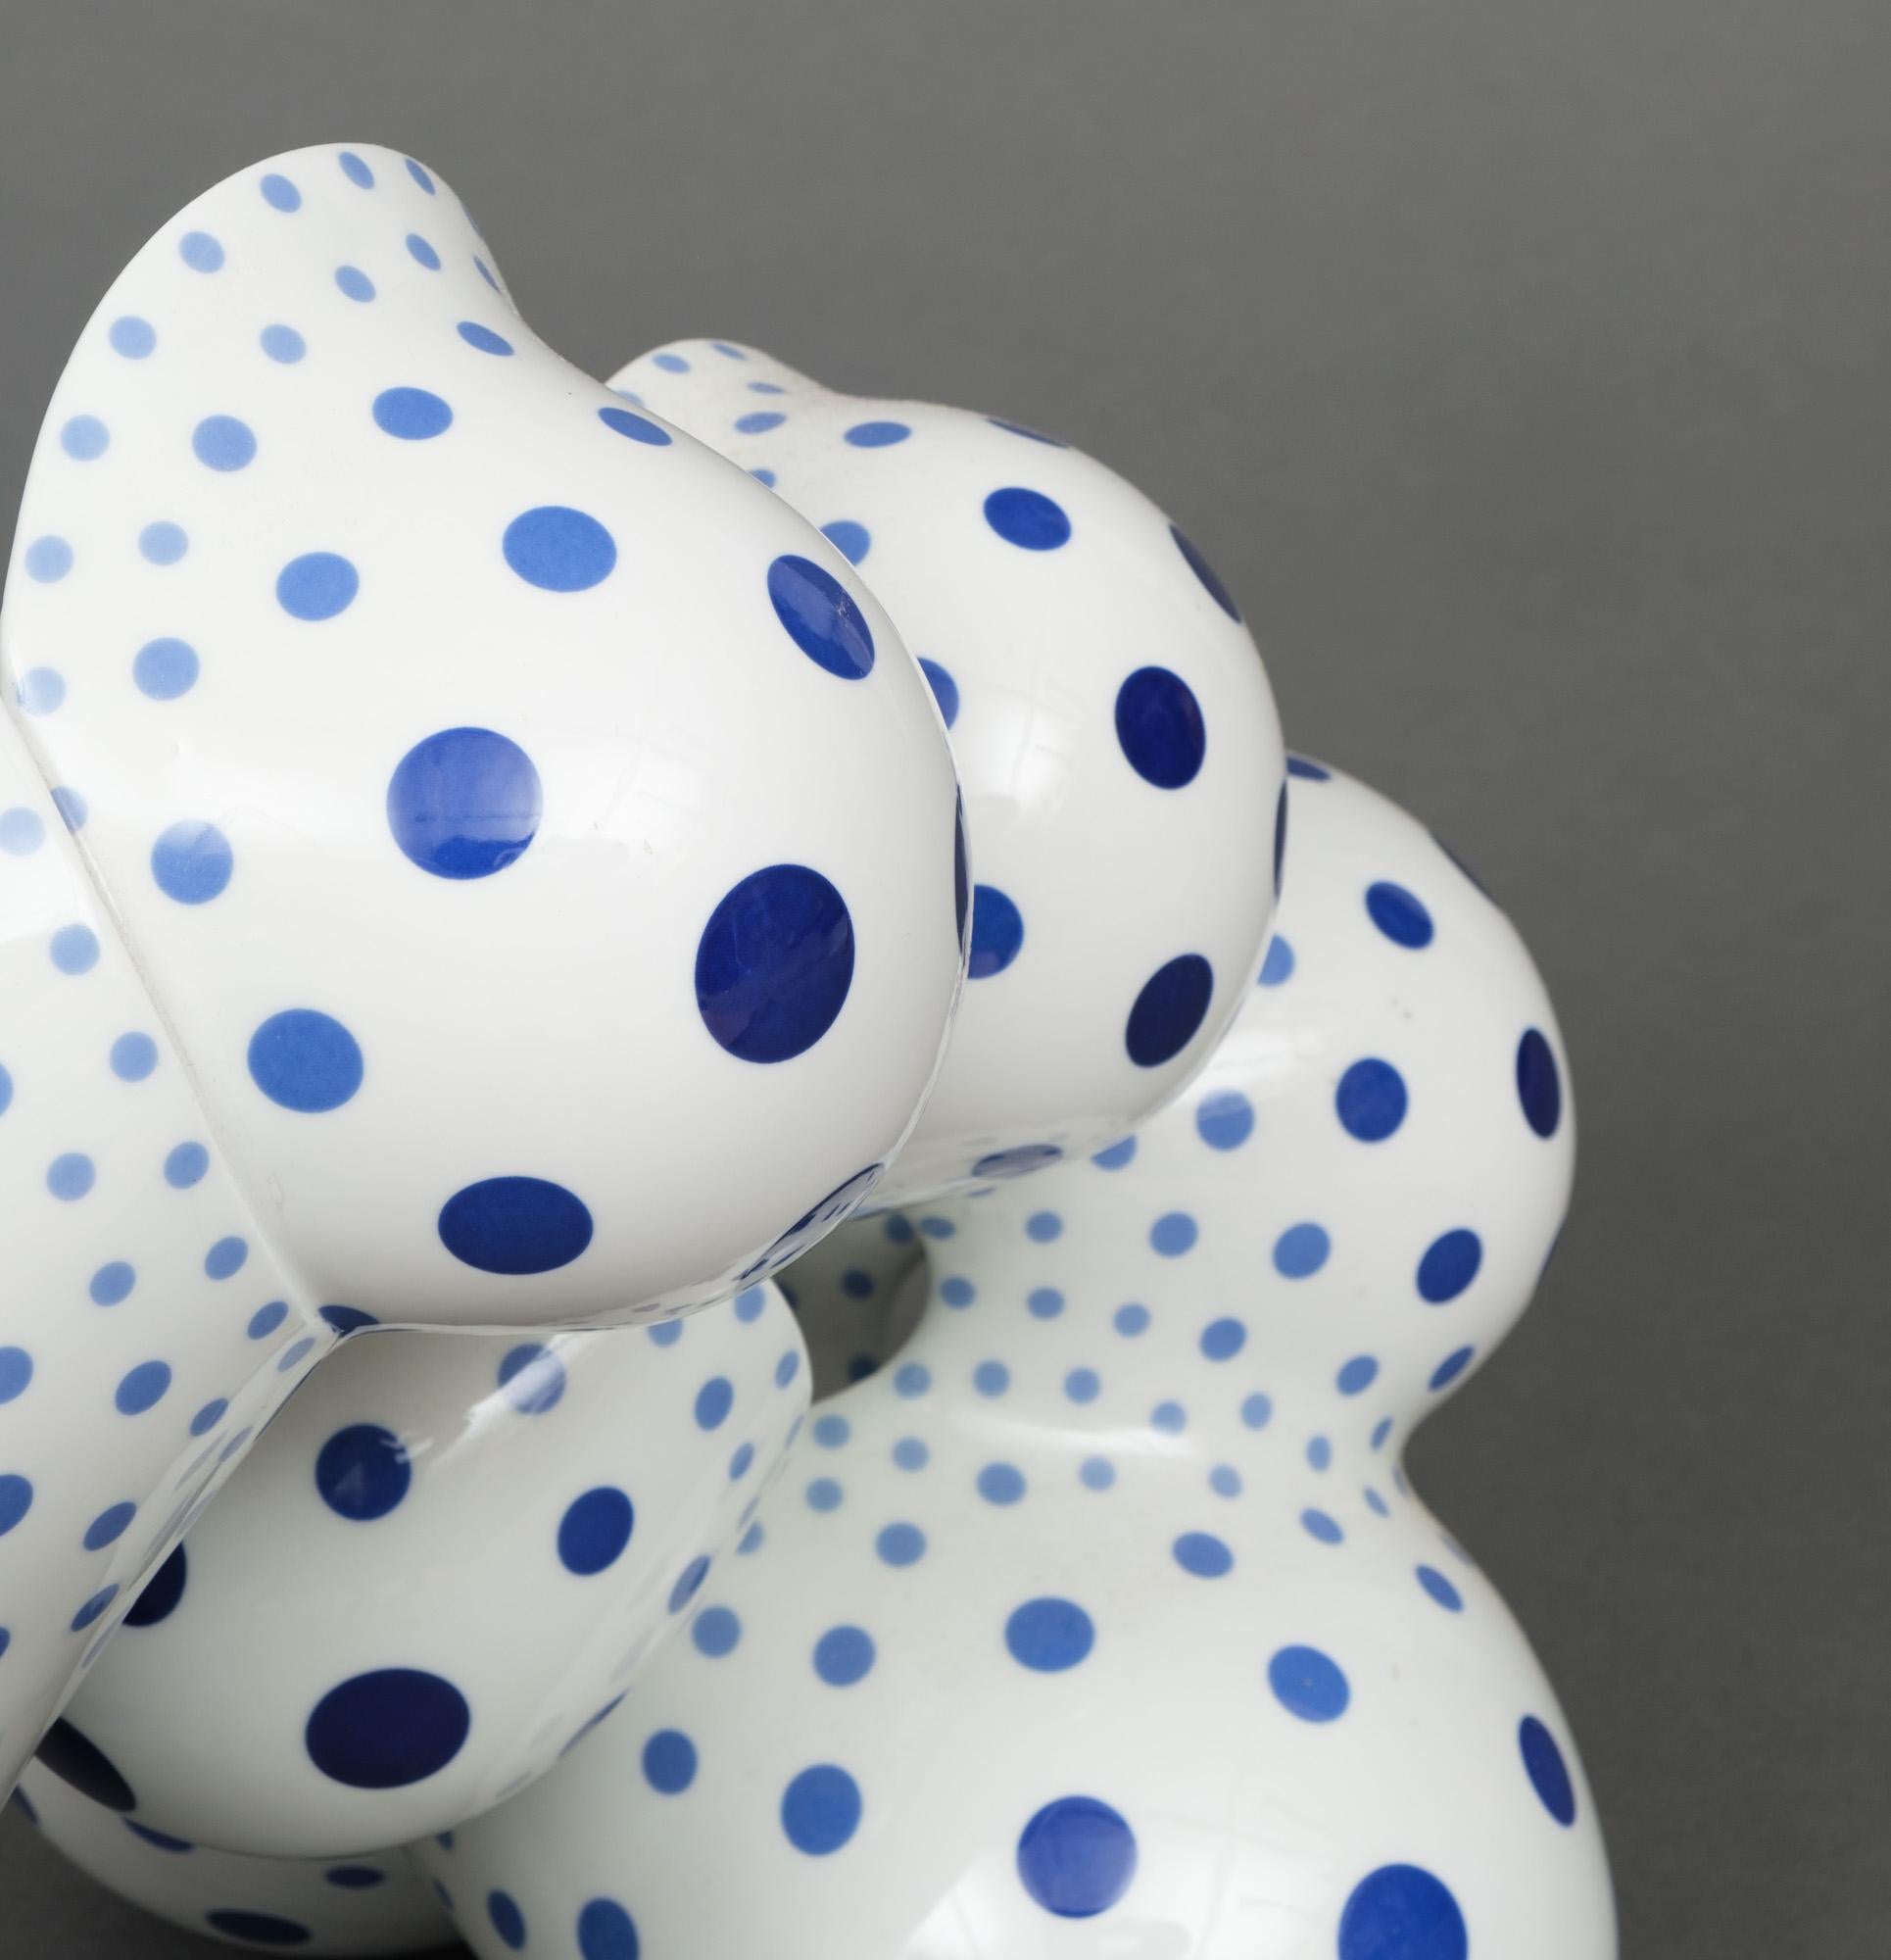 Outstanding and large porcelain biomorphic abstract sculpture covered in clear glaze and regularly distributed opulent cobalt blue polka dots of varying sizes, titled ‘Twisting Back, Multiplying’, hand-built by the highly praised Japanese ceramic